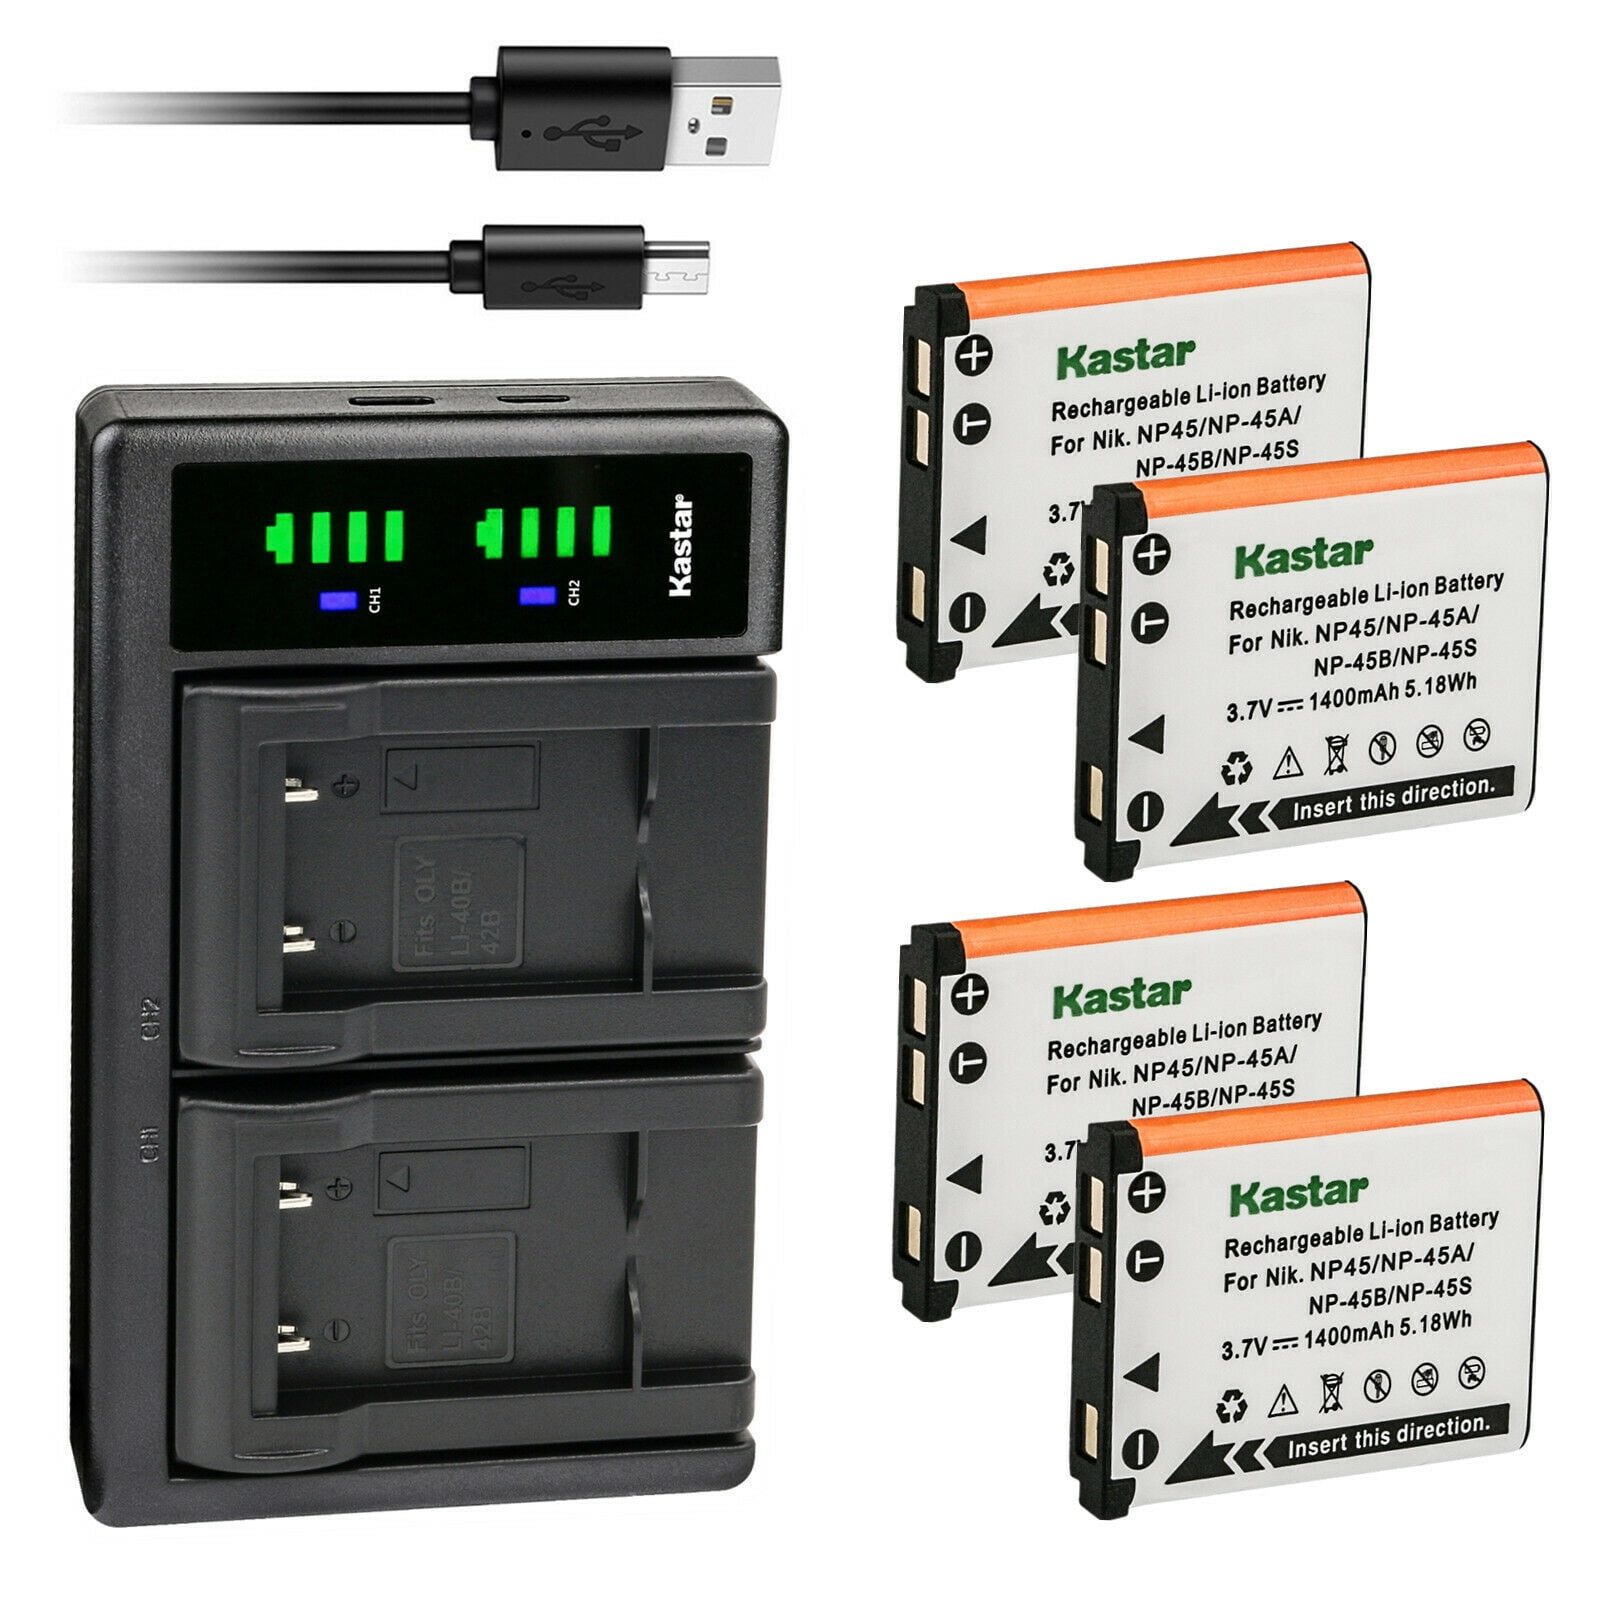 Peer Fascinerend Pompeii Kastar 1-Pack Battery and LTD2 USB Charger Compatible with Fujifilm NP-45A  NP-45B NP-45S, Fujifilm FinePix Z37 FinePix Z70 FinePix Z71 FinePix Z80  FinePix Z81 FinePix Z90 FinePix Z91 FinePix Z100fd - Walmart.com